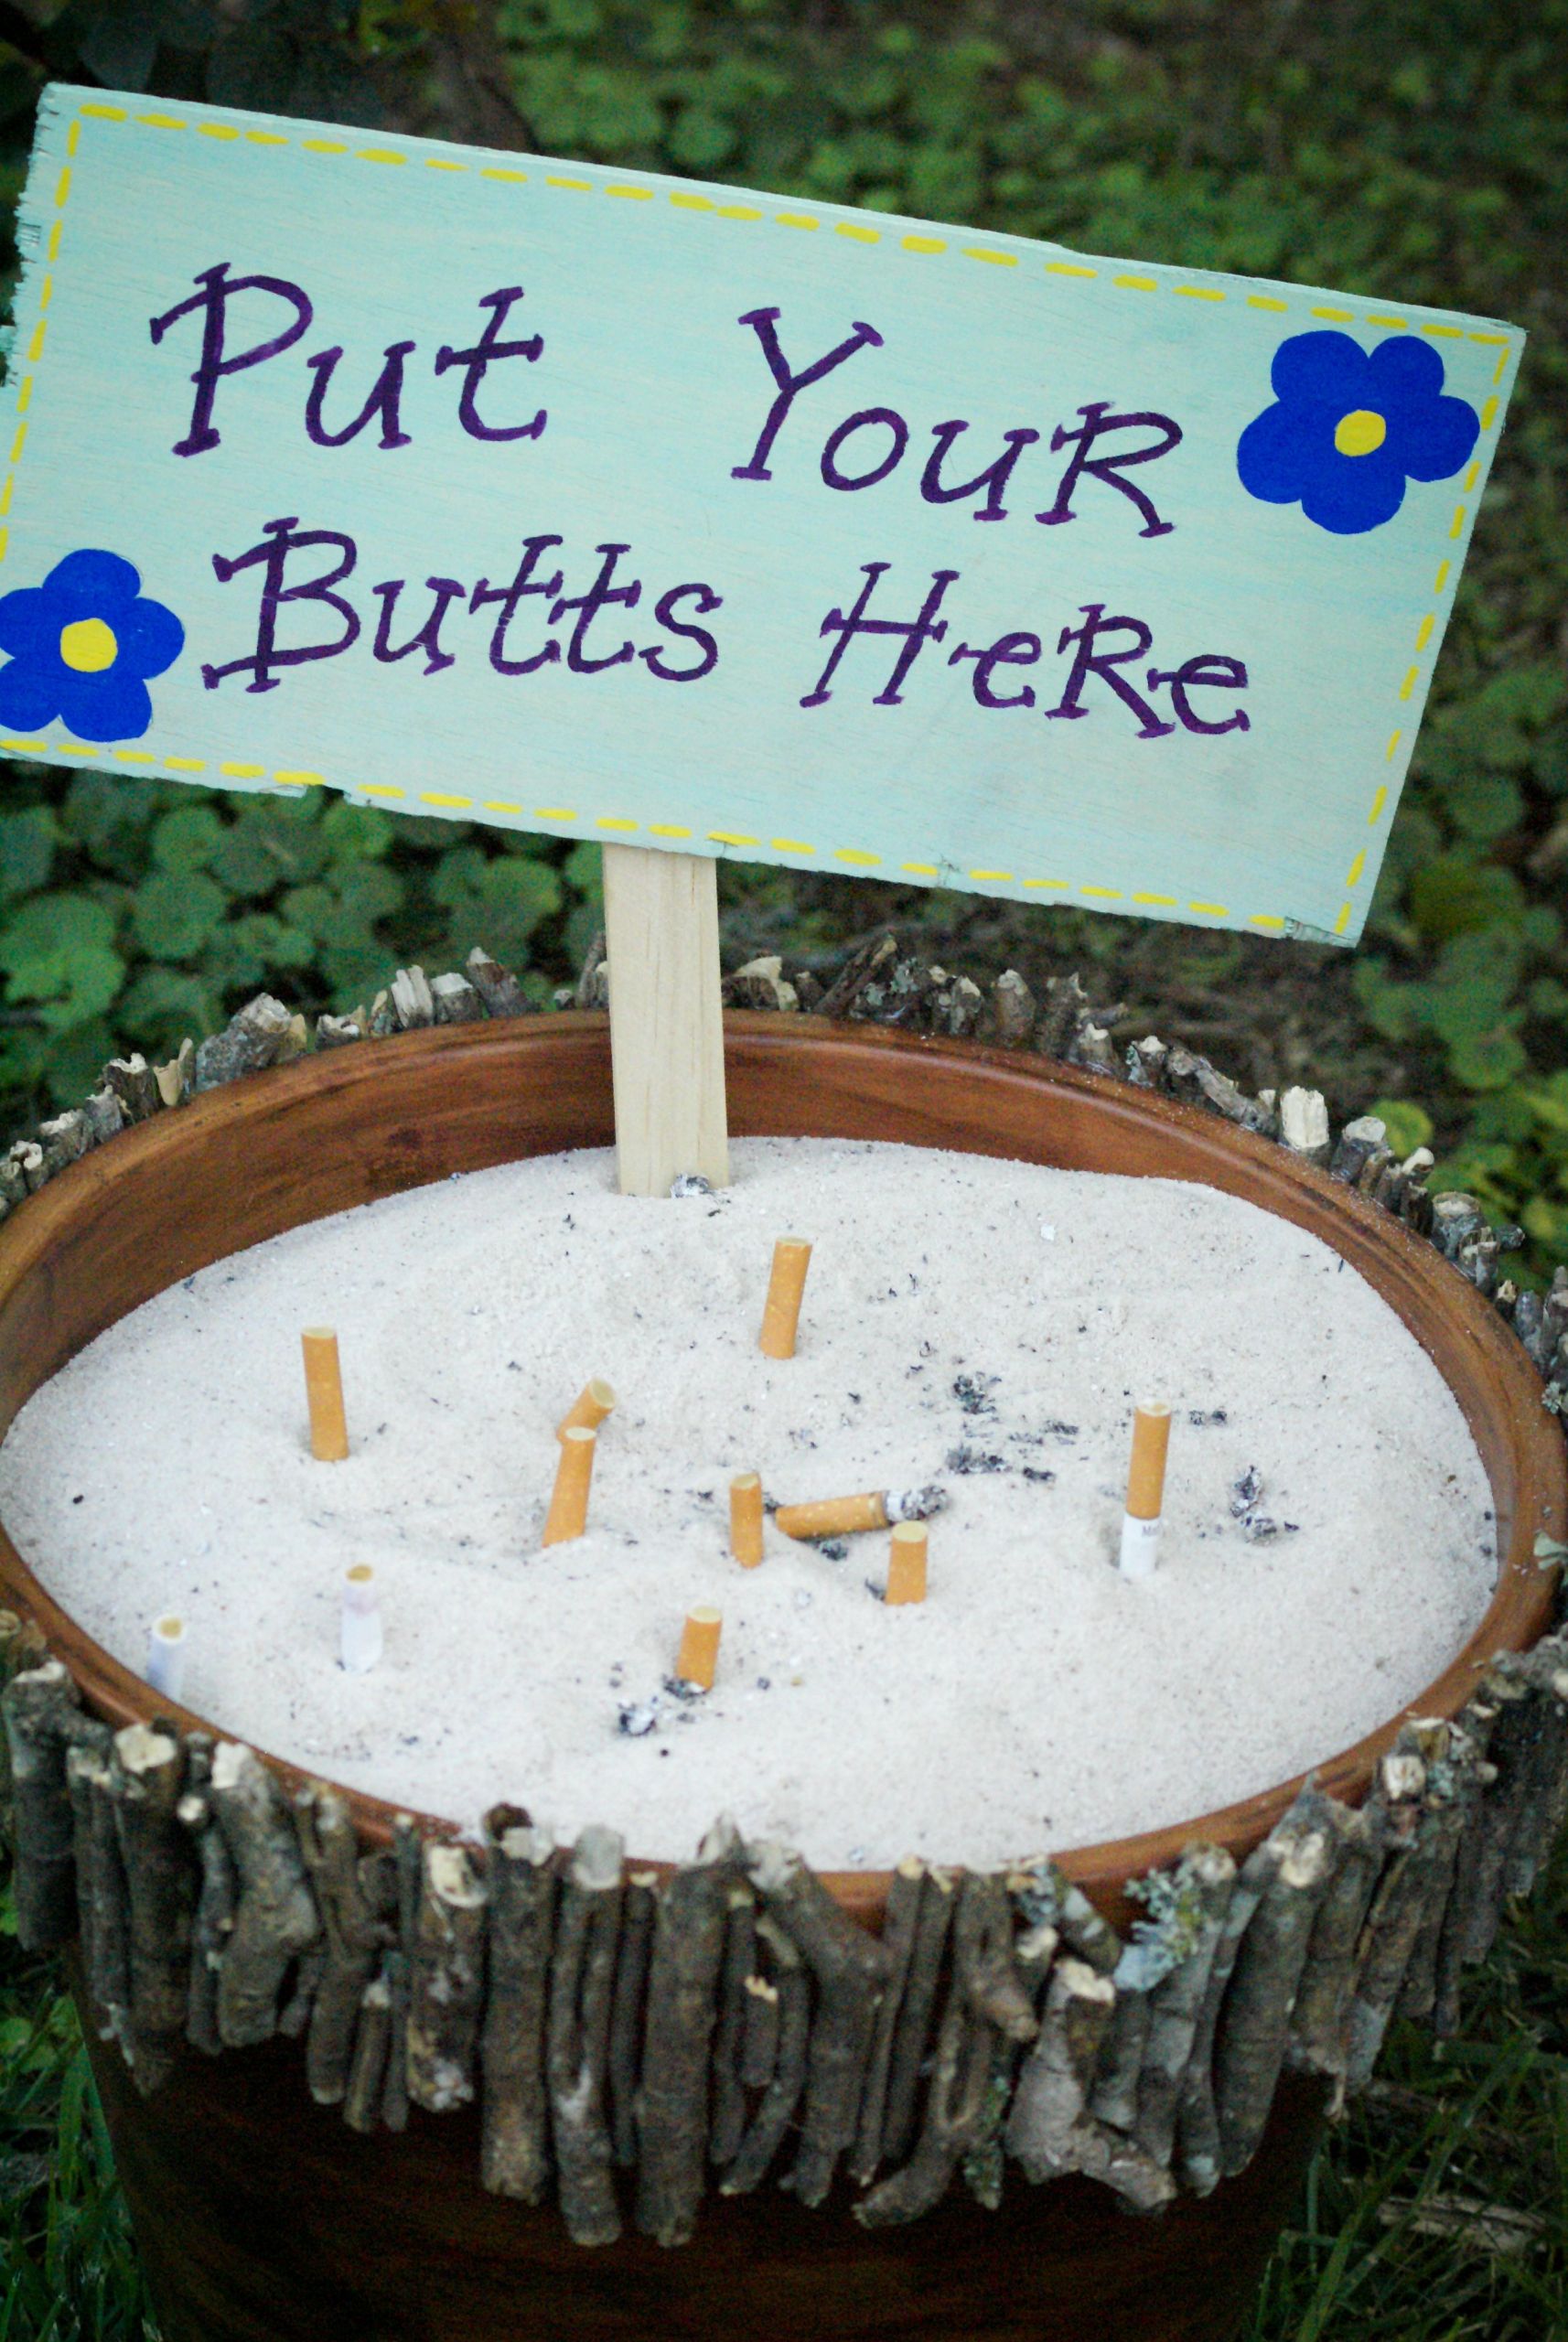 DIY Outdoor Ashtrays
 Outdoor ashtray for the smokers So cute "Put your butts